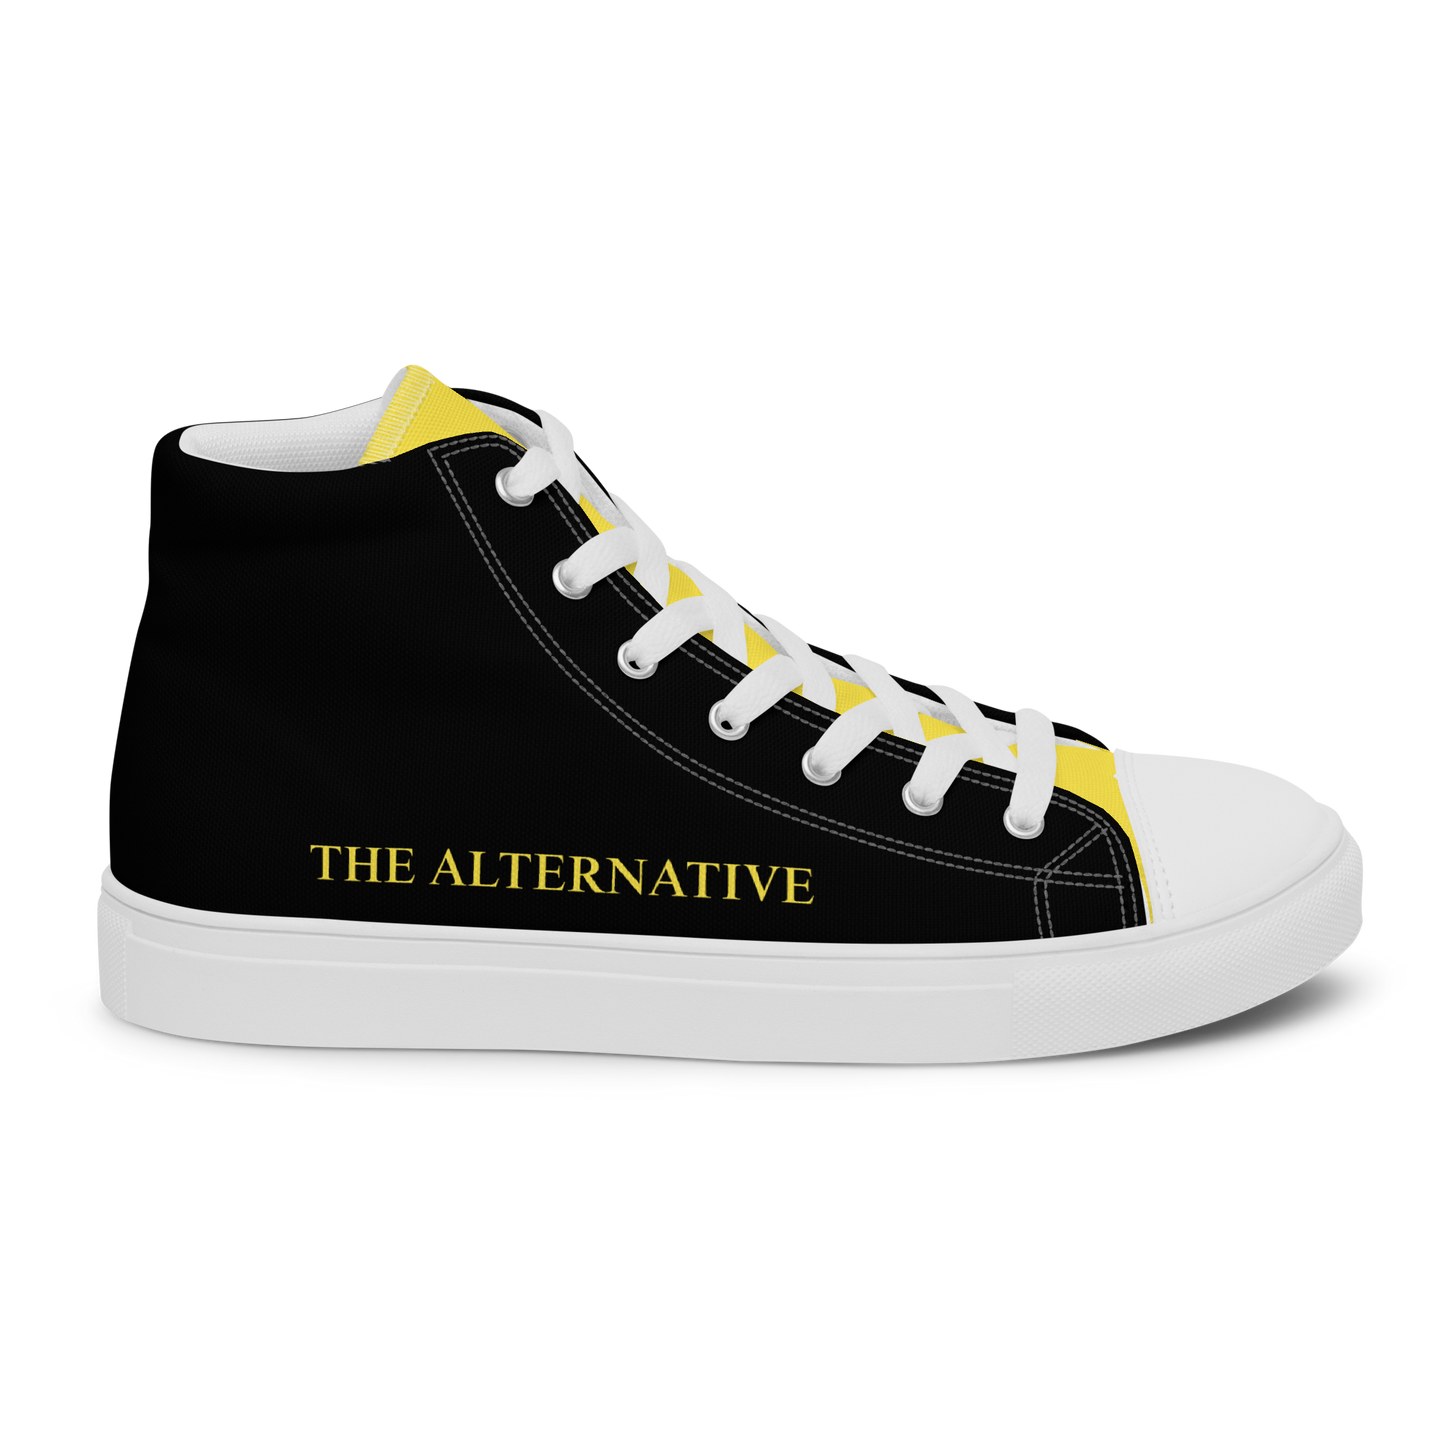 Women’s High Top Shoes - The Alternative